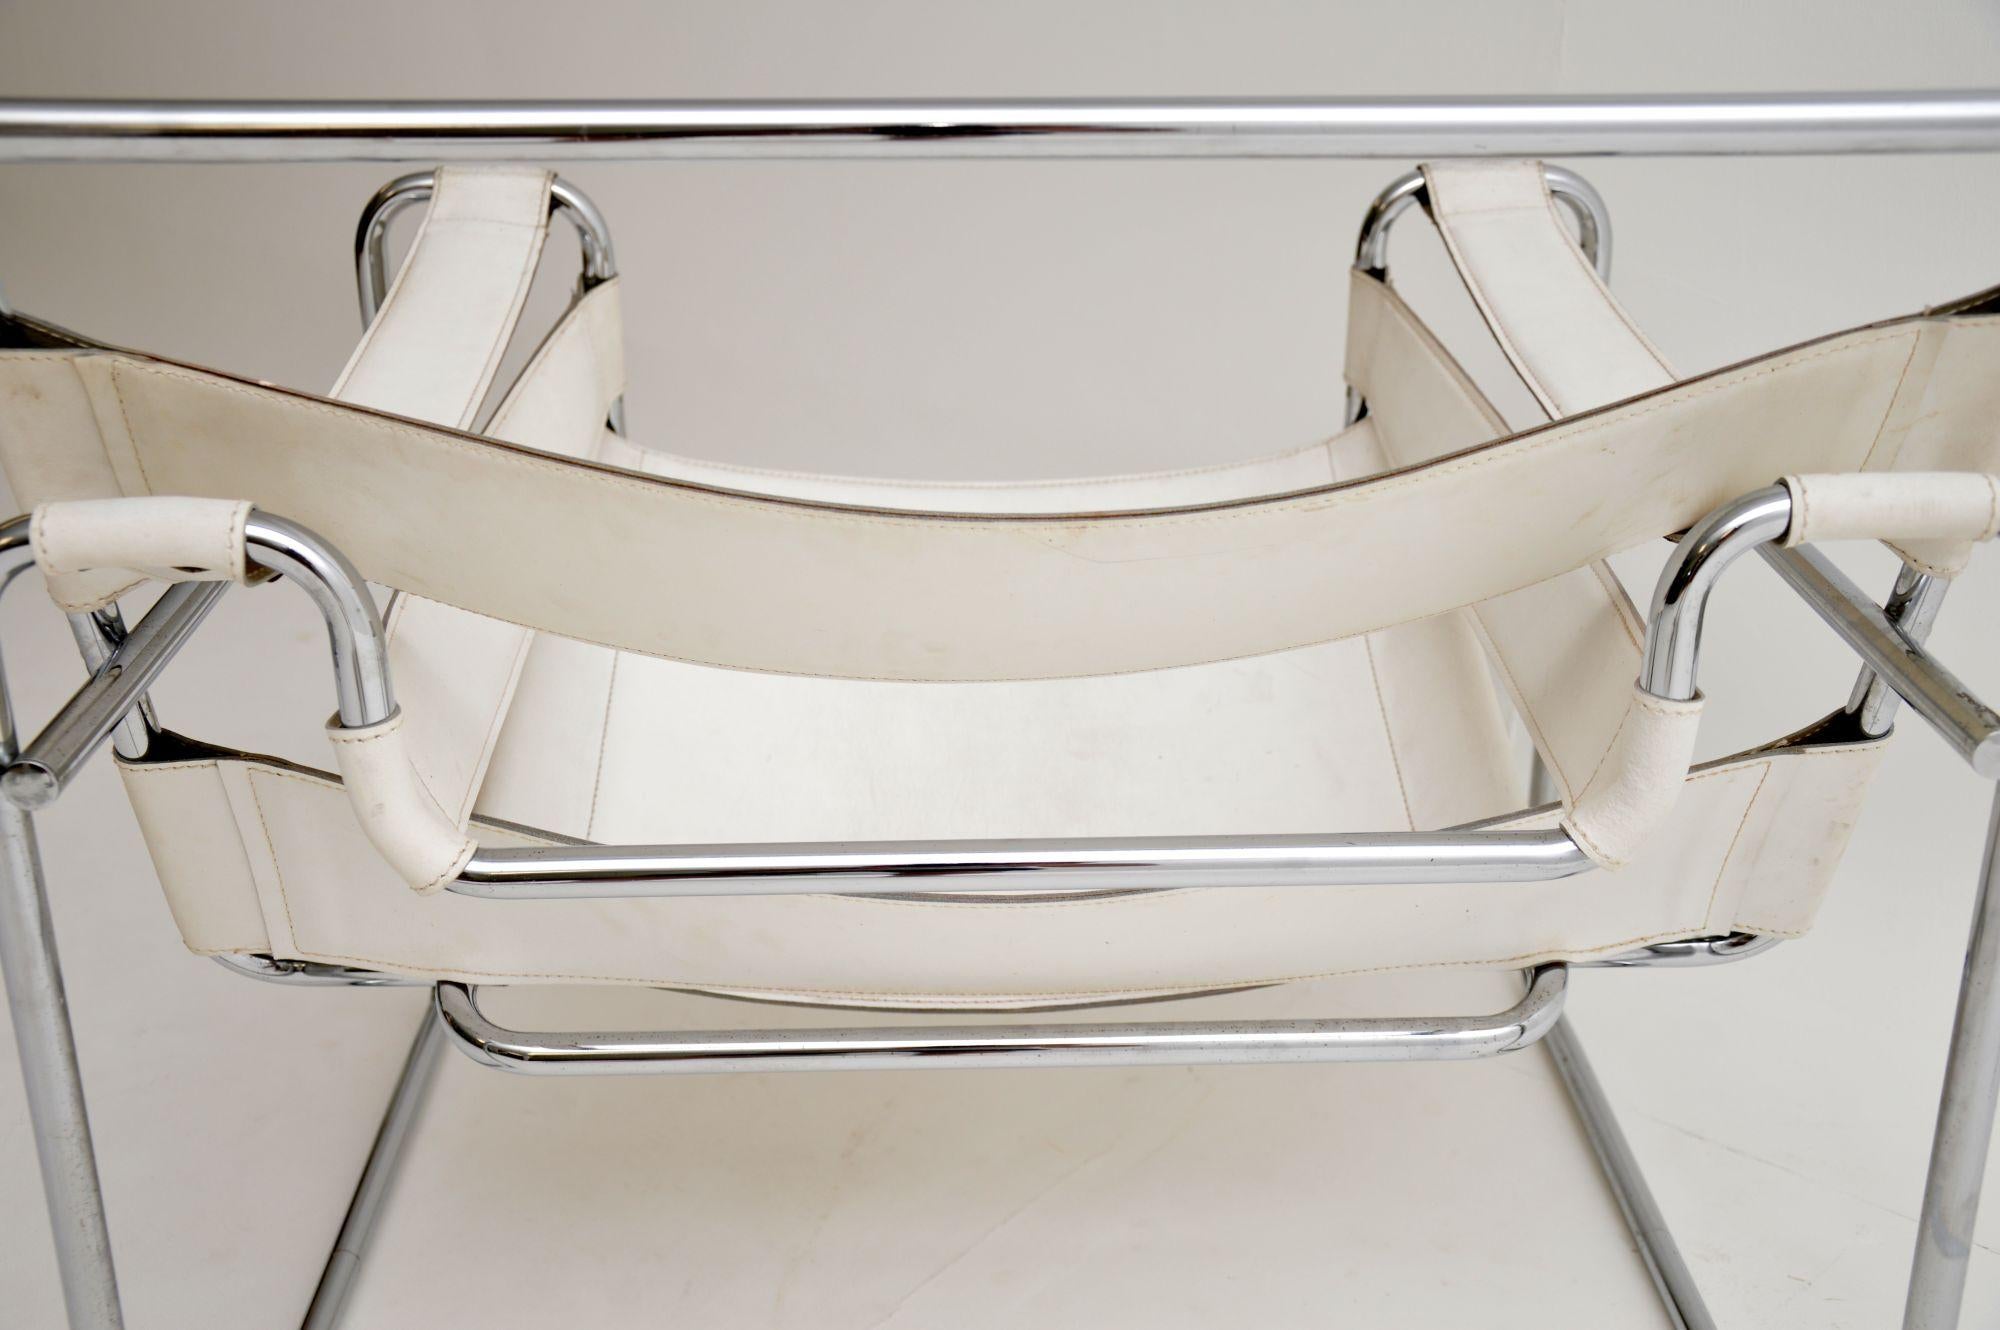 A stylish and iconic ‘Wassily’ armchair originally designed by Marcel Breuer in the 1920s. This is a 1960s production by Gavina, made in Italy. It is of super quality and is in nice vintage condition. The white leather is thick and intact with no